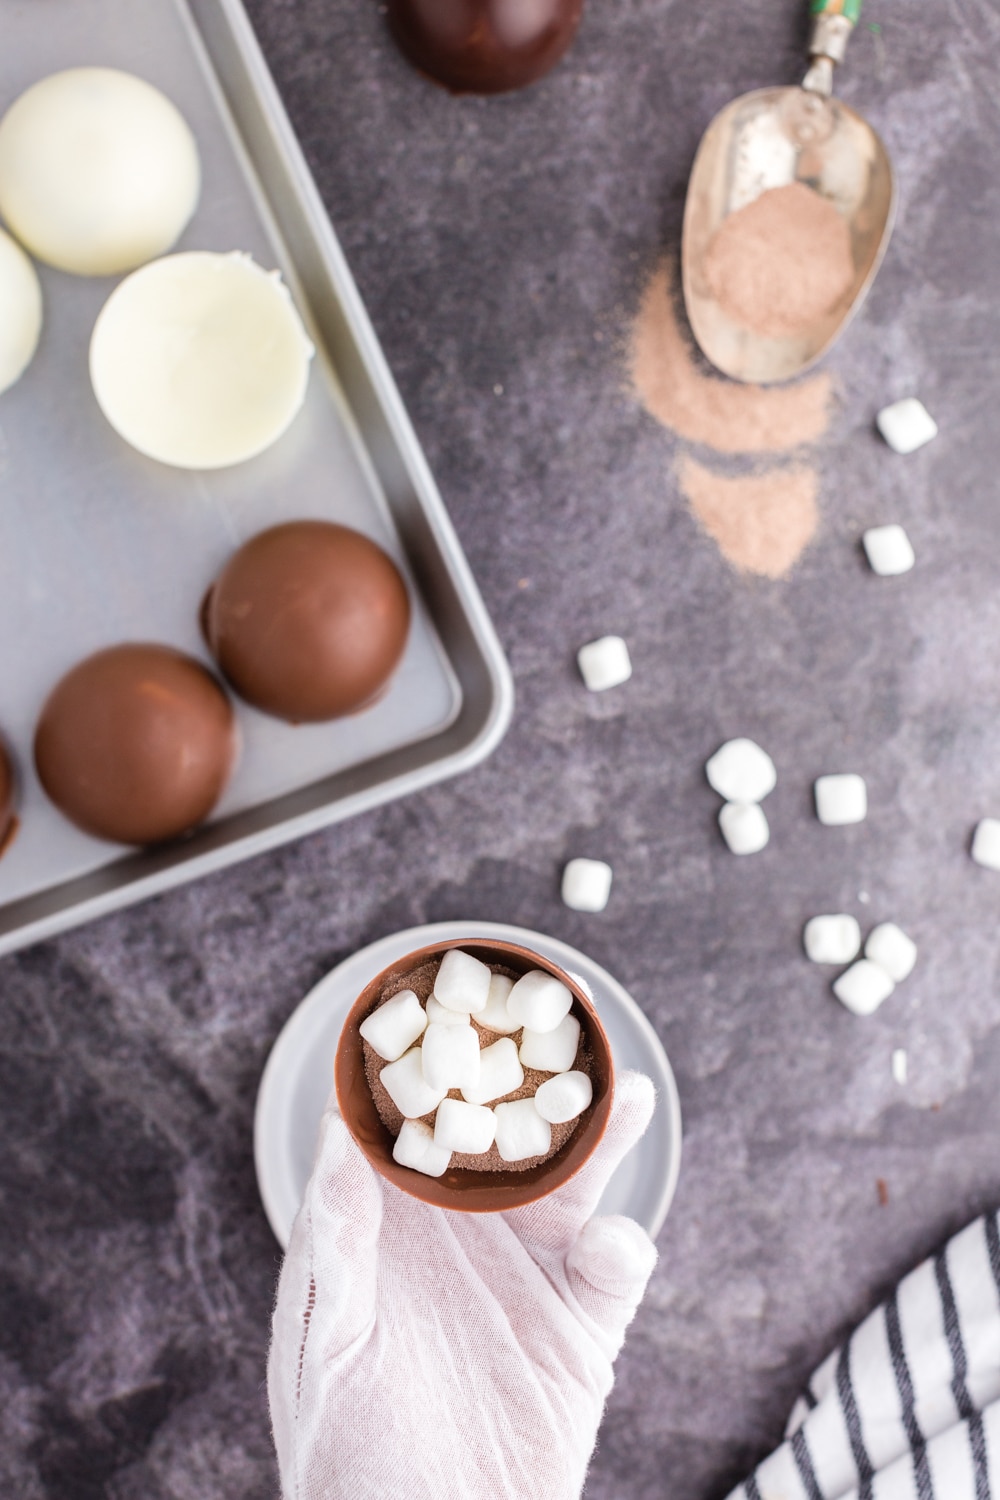 Hand with glove holding one sphere that's filled with hot chocolate and mini marshmallows, tray of chocolate spheres, metal scoop with hot chocolate, loose mini marshmallows, striped linen on a dark marble countertop.